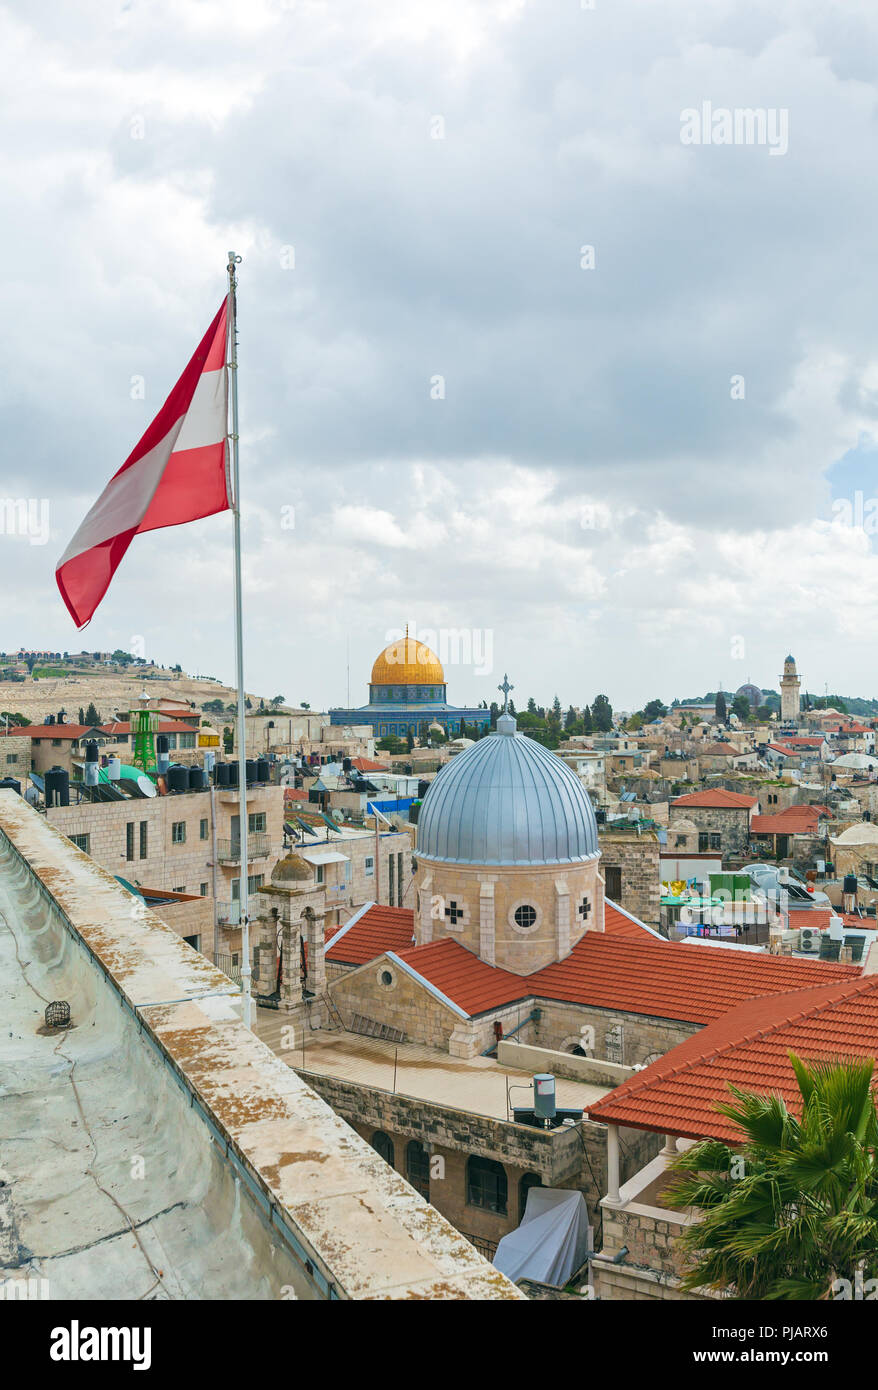 Jerusalem Old City Roofs with Holy Sepulcher Cathedral, Israel Stock Photo